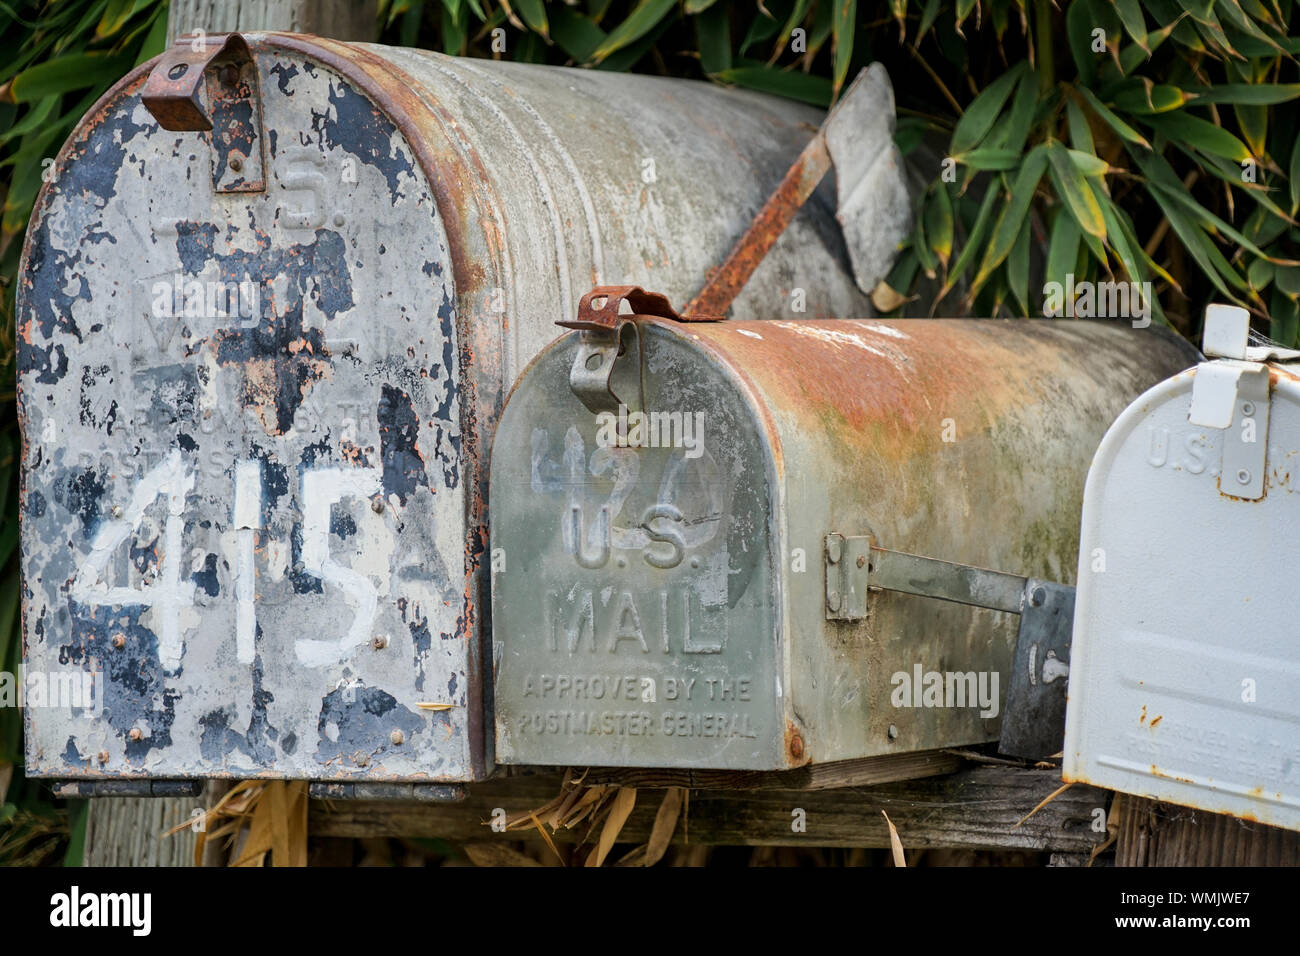 Old and wornd US mailboxes still doing their duty Stock Photo